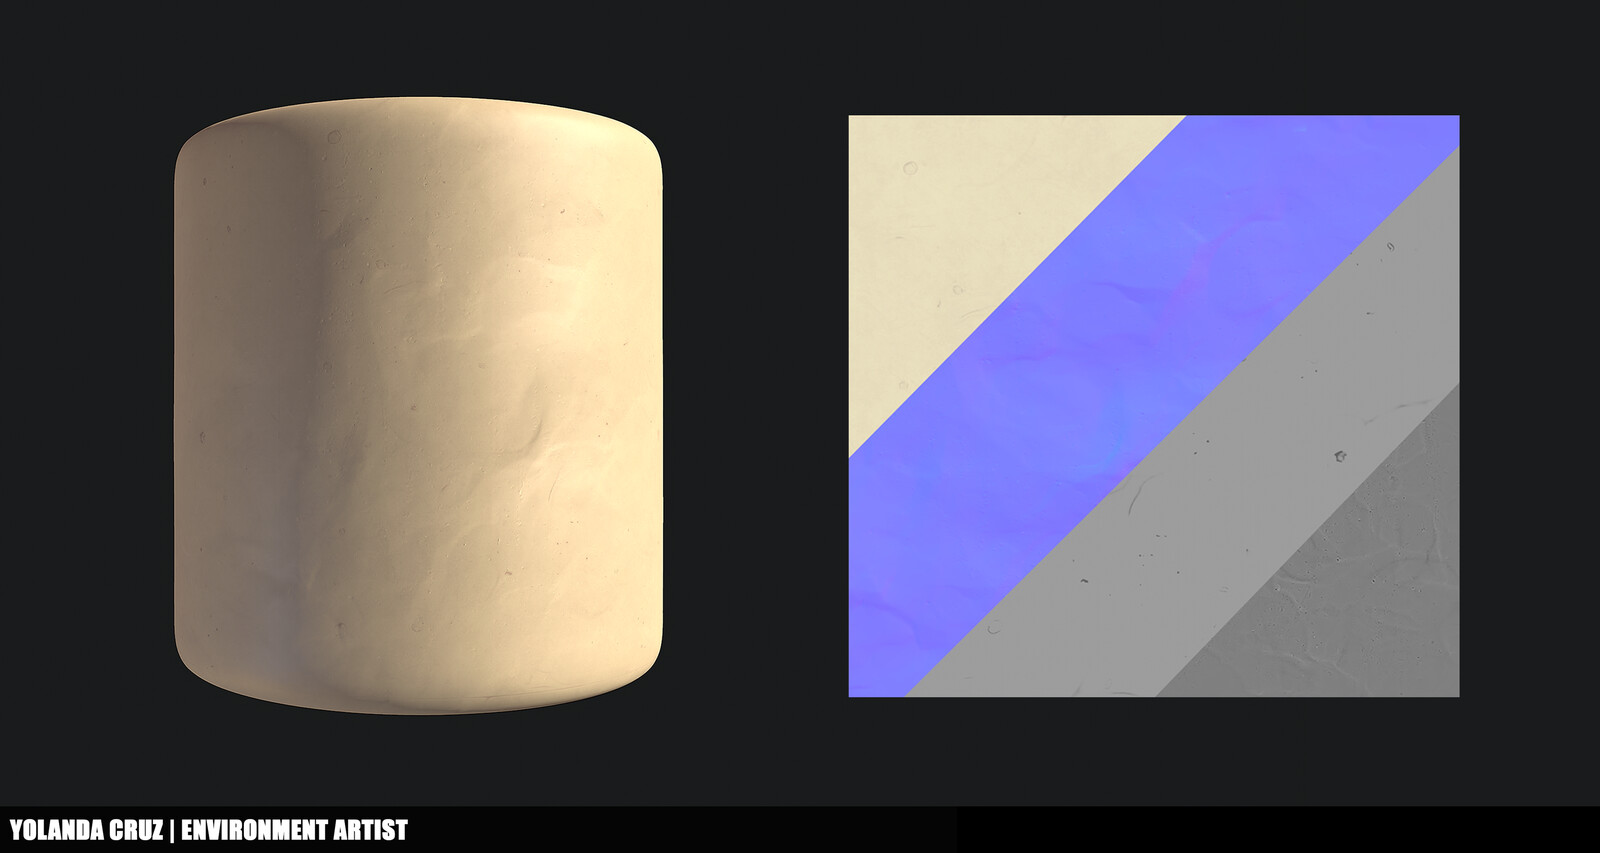 Stylized Sand Material